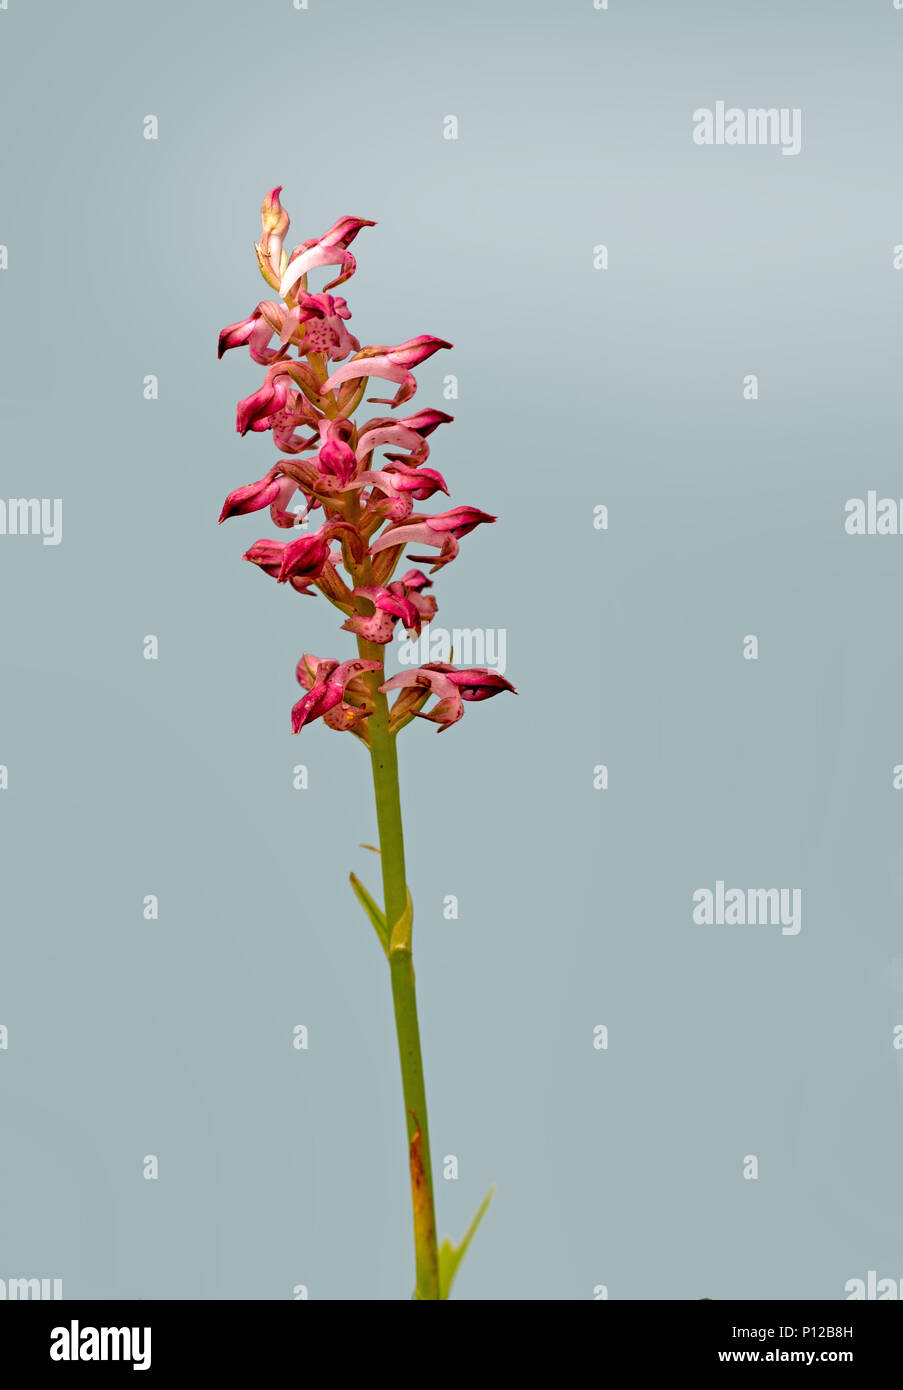 Wild orchid, Anacamptis coriophora sp fragrans. Photographed in situ in Italy, with background. Stock Photo